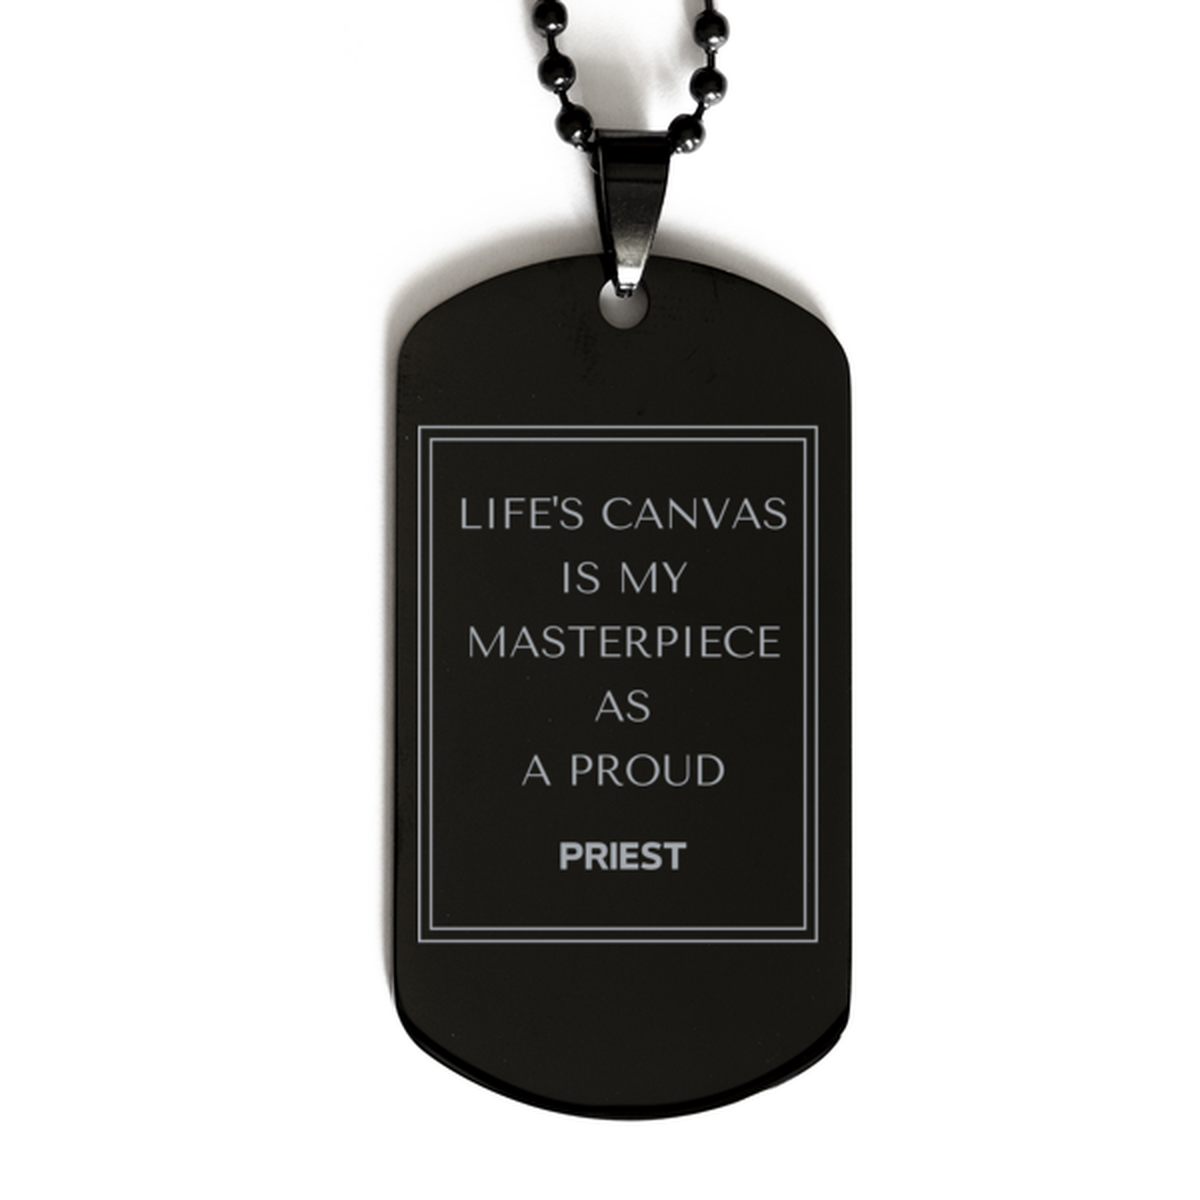 Proud Priest Gifts, Life's canvas is my masterpiece, Epic Birthday Christmas Unique Black Dog Tag For Priest, Coworkers, Men, Women, Friends